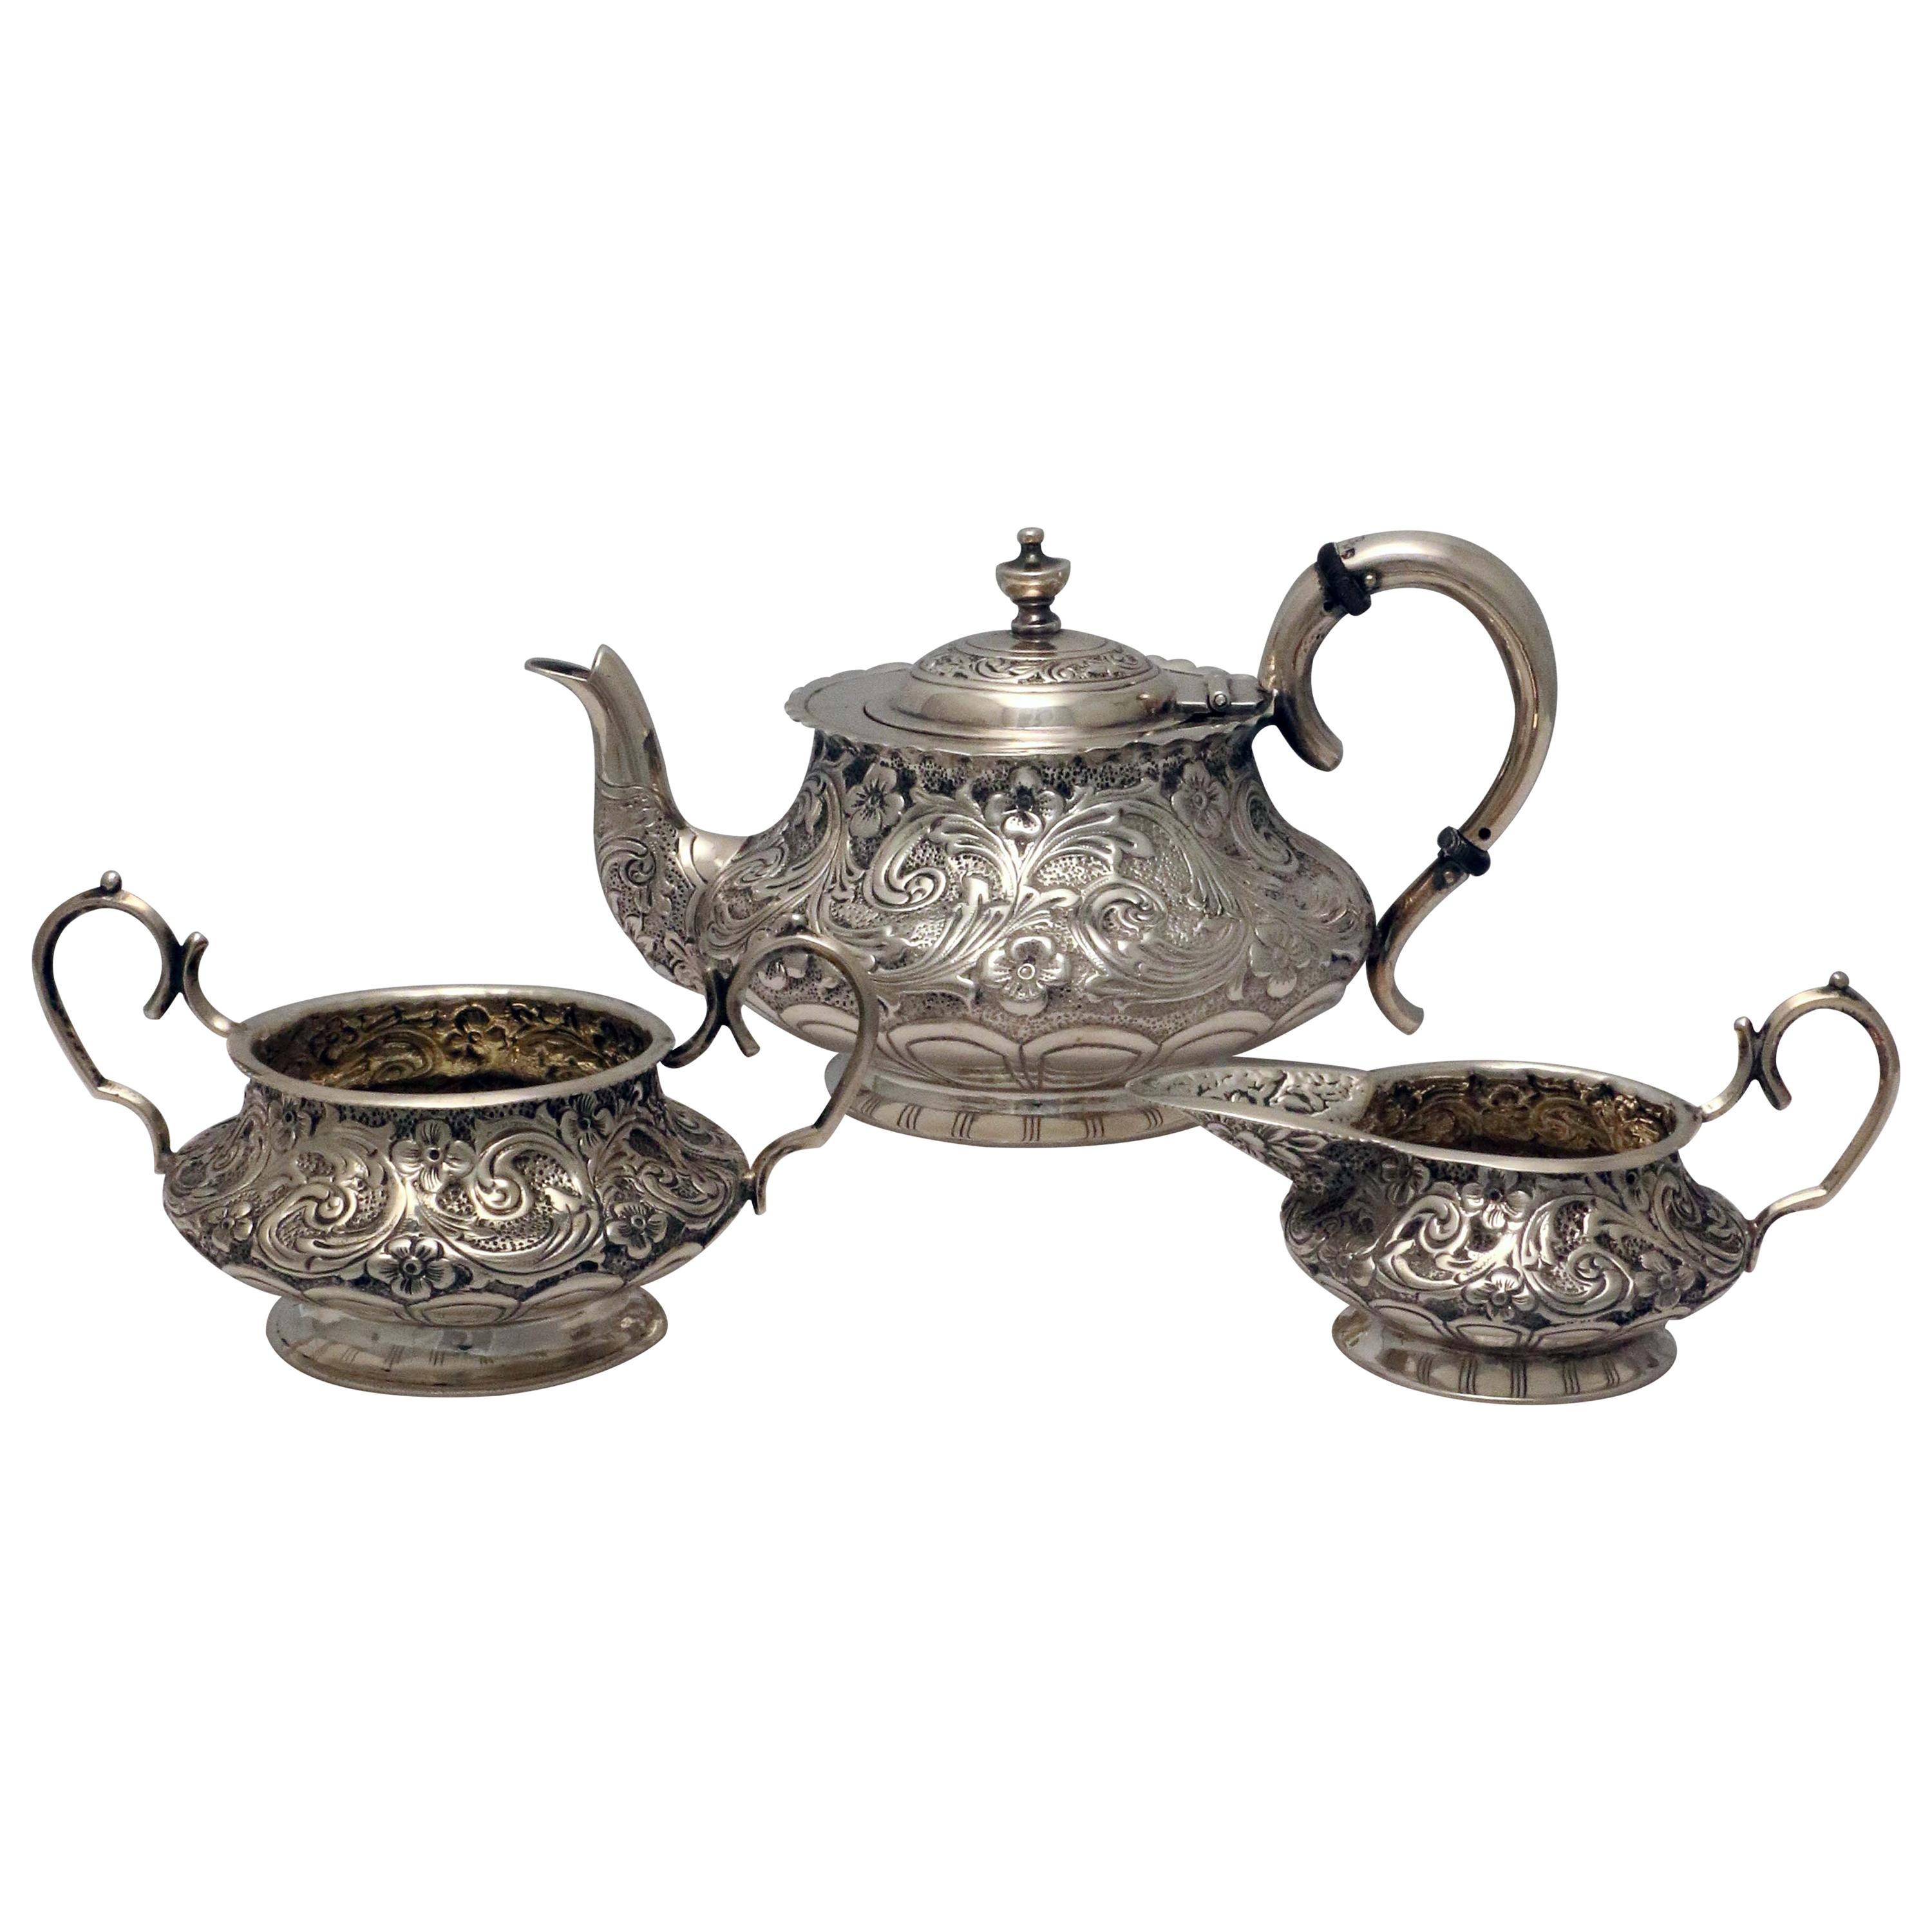 Victorian Silver Batchelors' Tea Service with Lobed and Acanthus Decoration